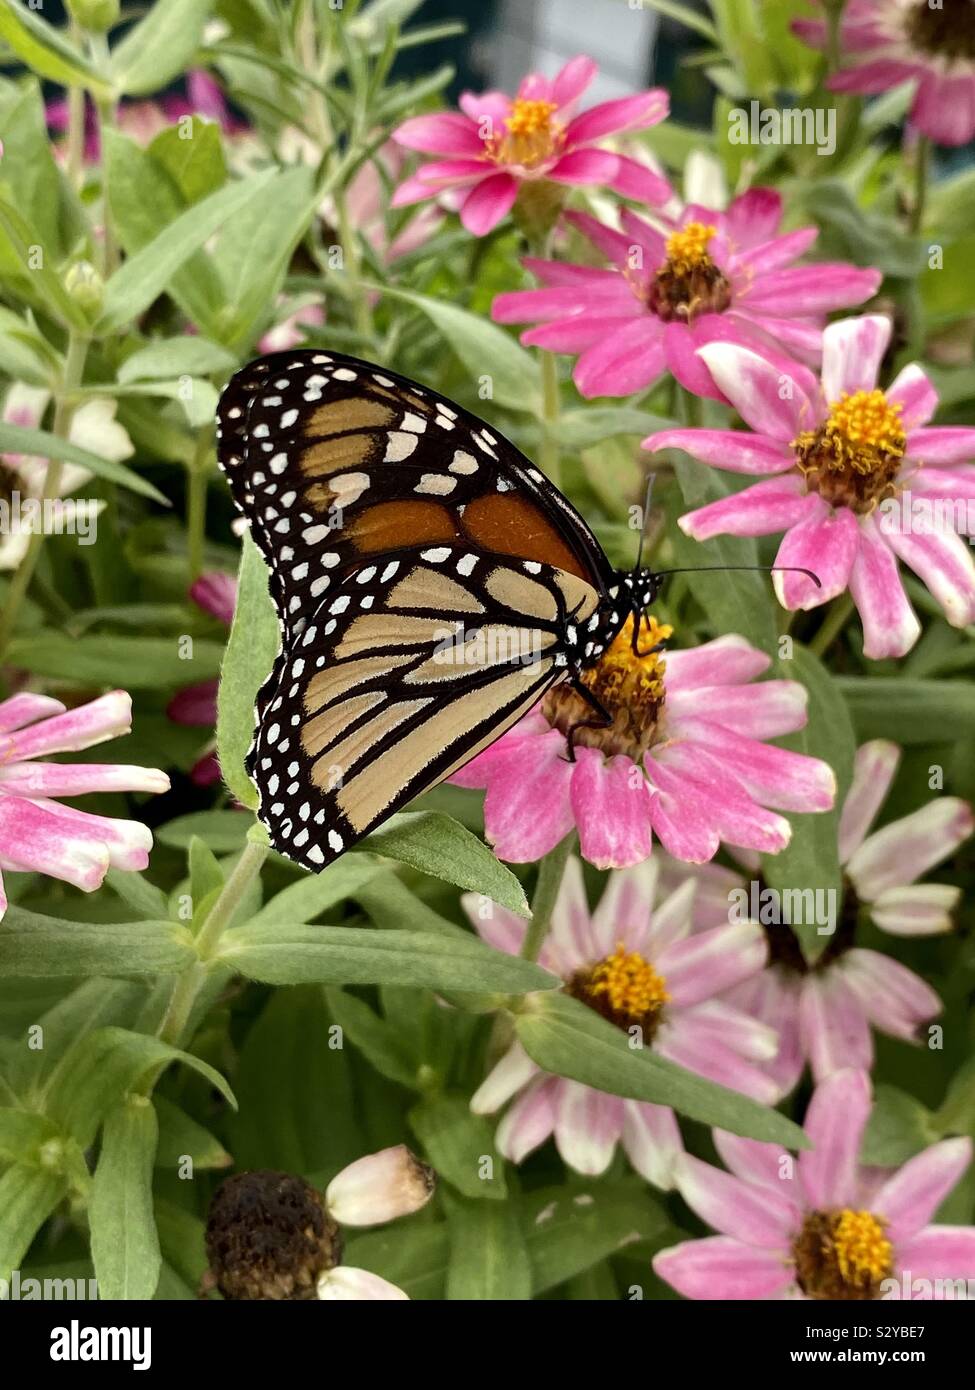 Closeup of a monarch butterfly on pink daisy flowers Stock Photo